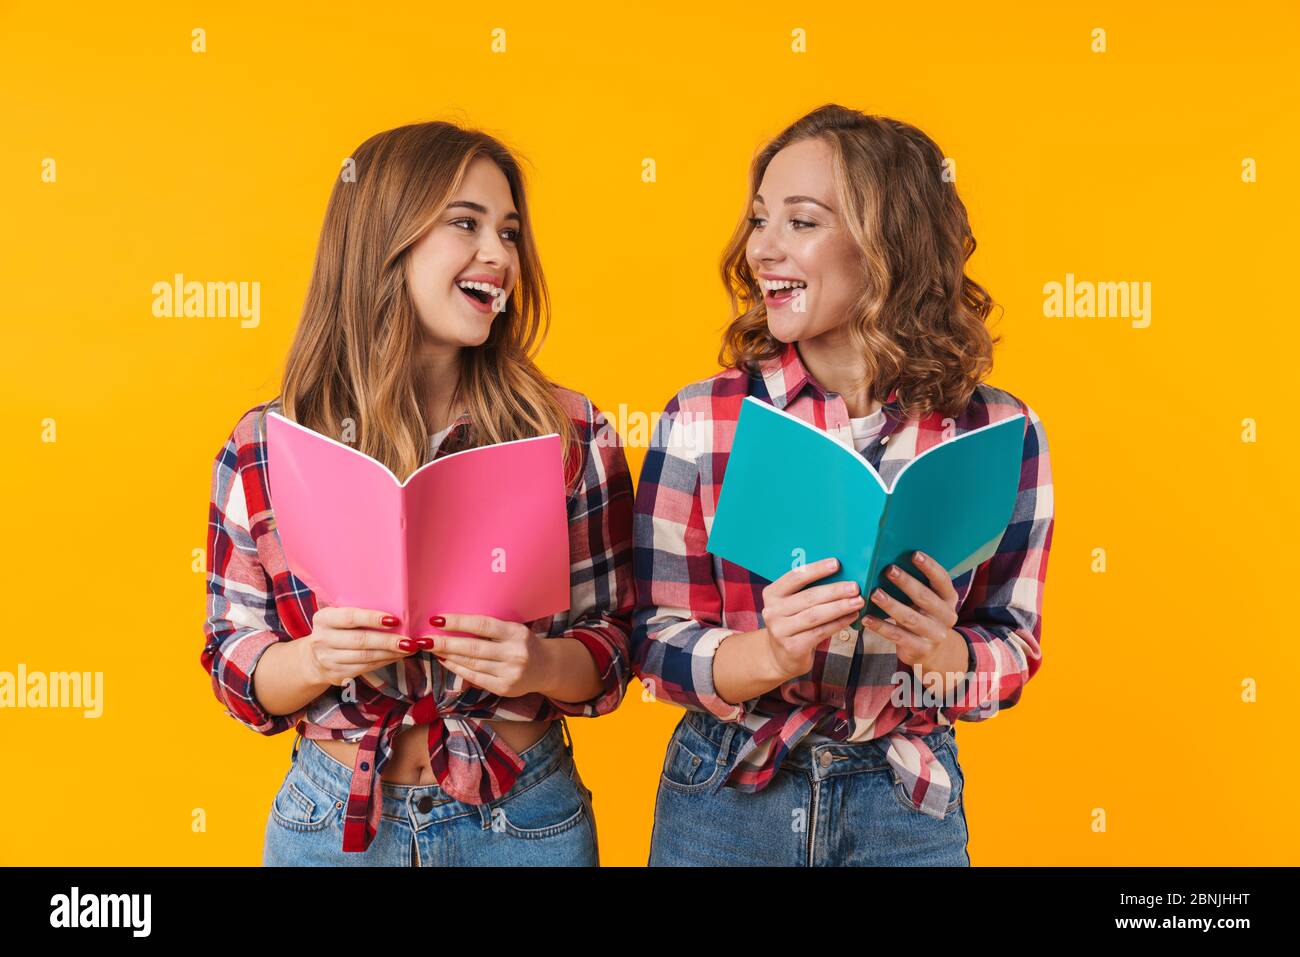 Image of two young beautiful girls wearing plaid shirts smiling and holding diary books isolated over yellow background Stock Photo